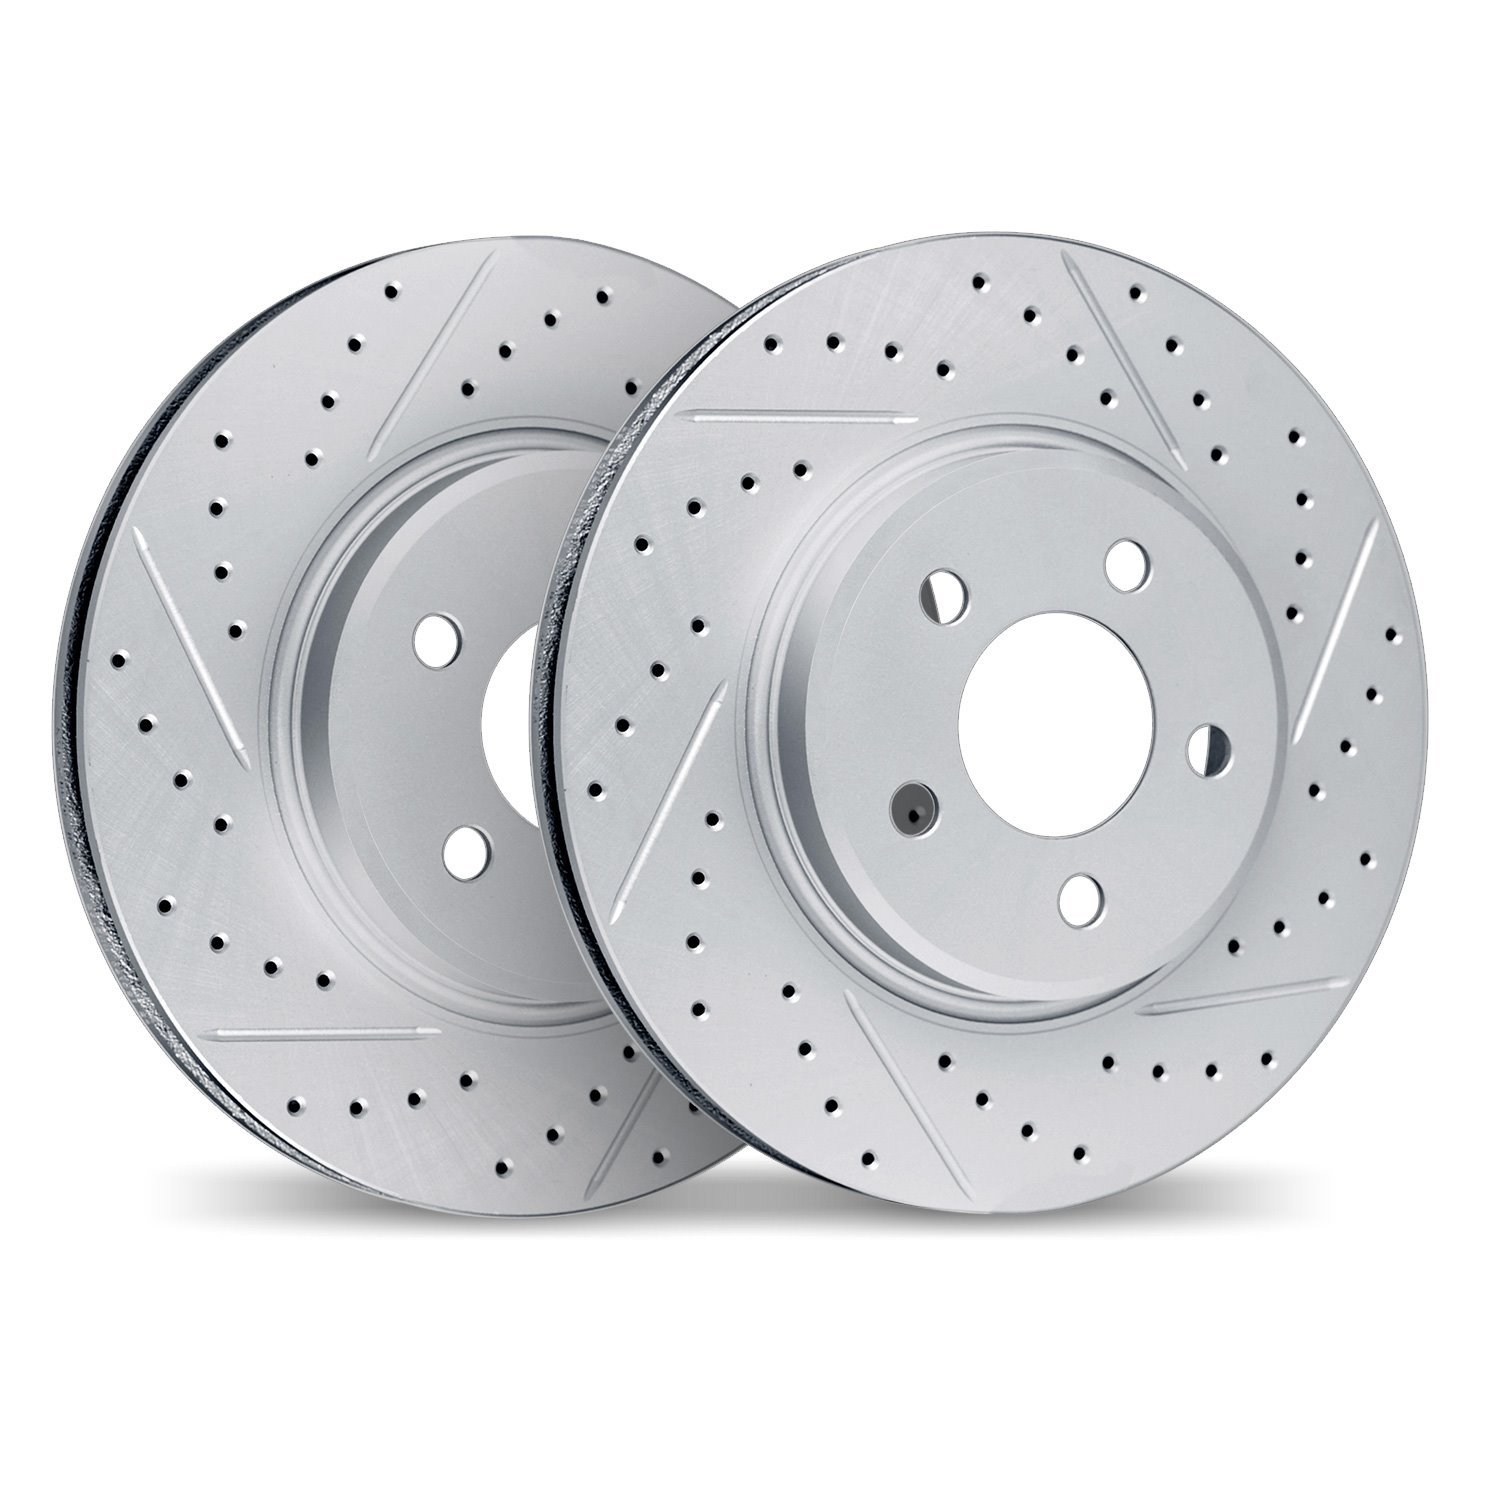 2002-55003 Geoperformance Drilled/Slotted Brake Rotors, Fits Select Ford/Lincoln/Mercury/Mazda, Position: Rear